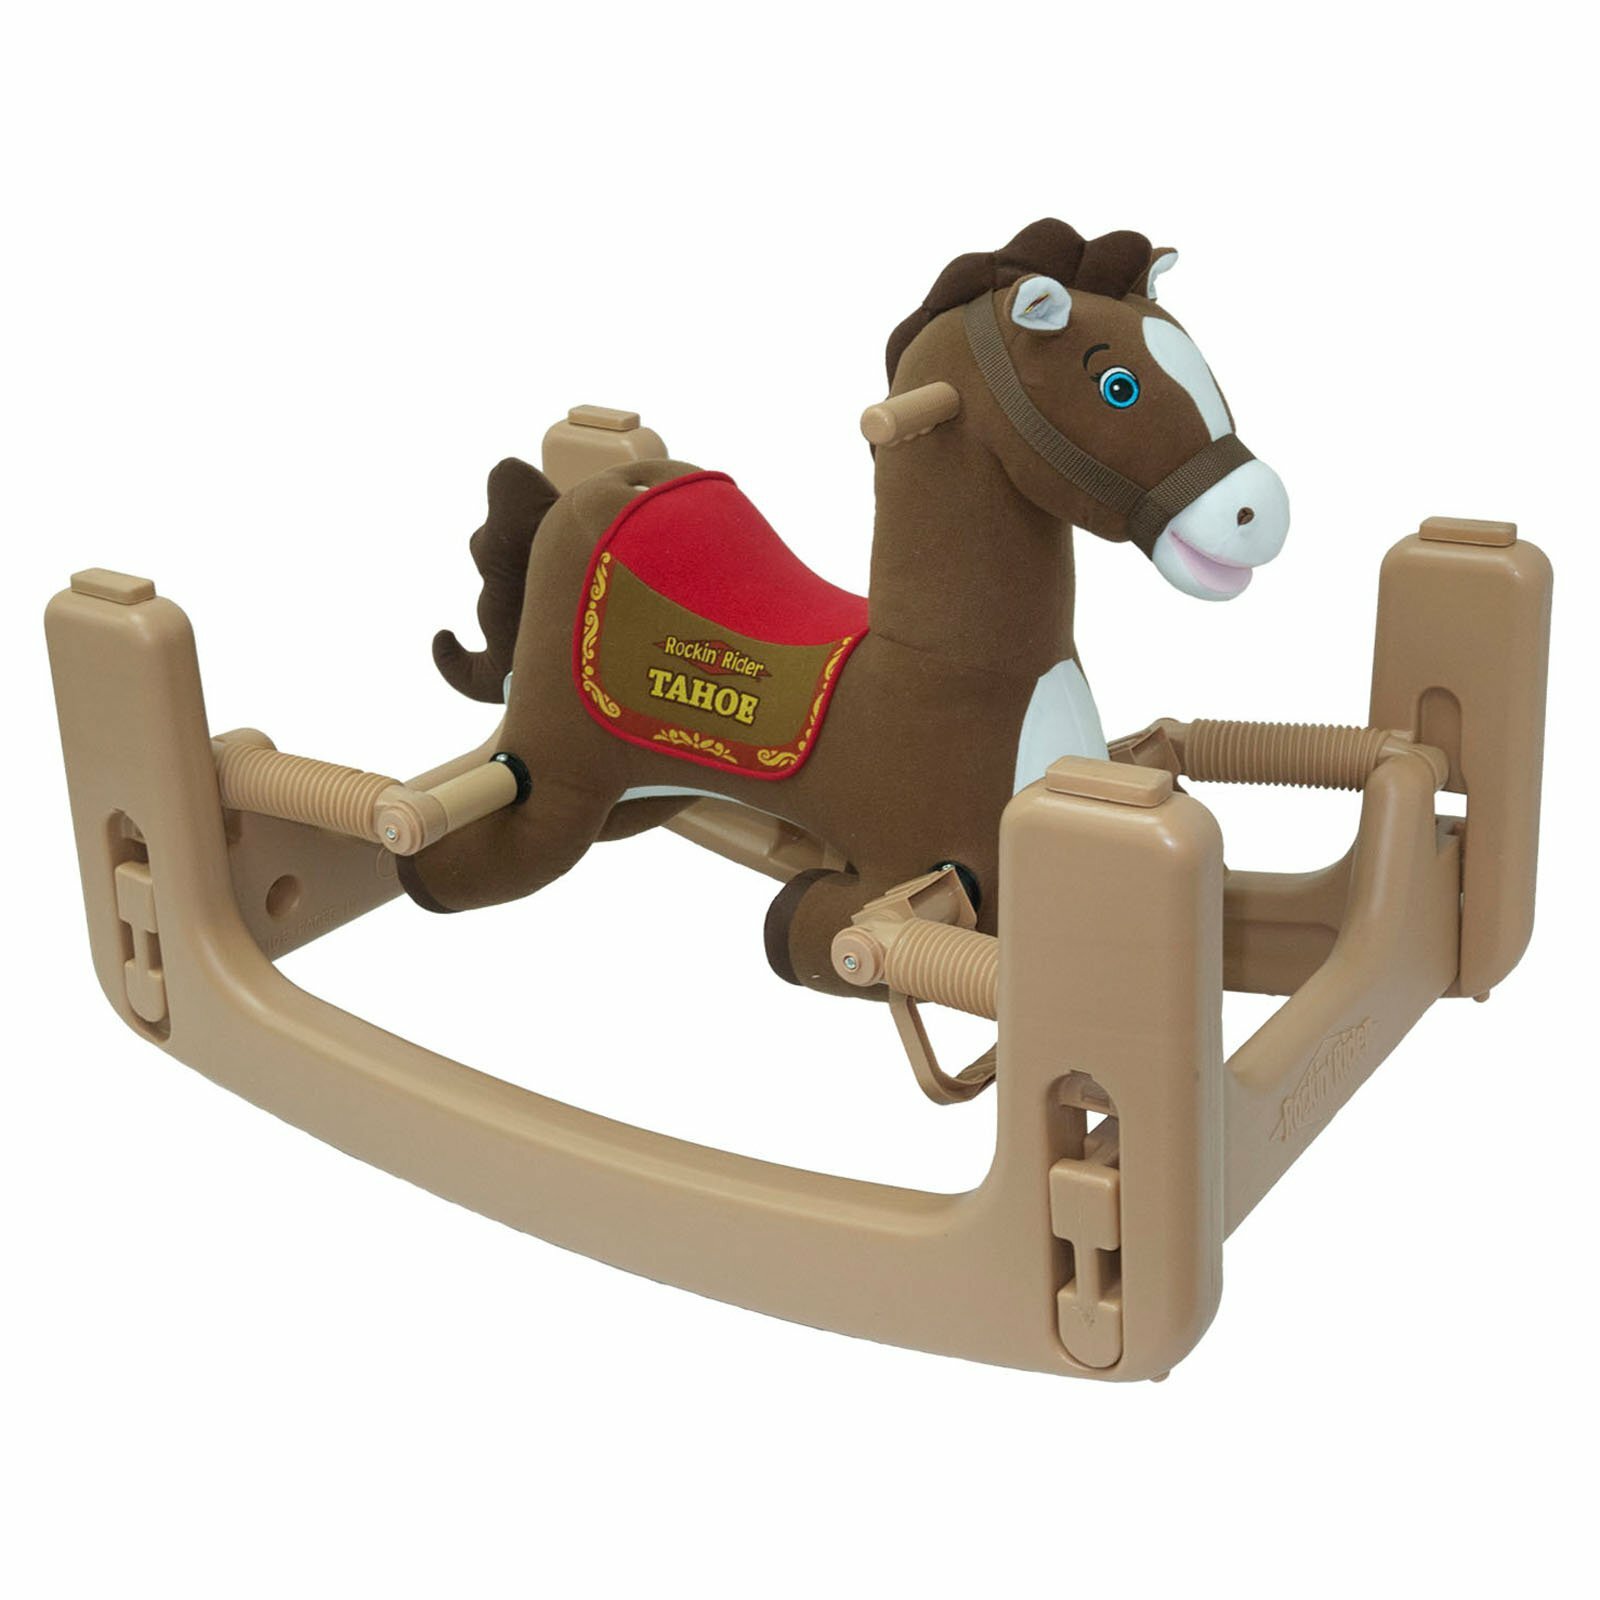 grow with me rocking horse